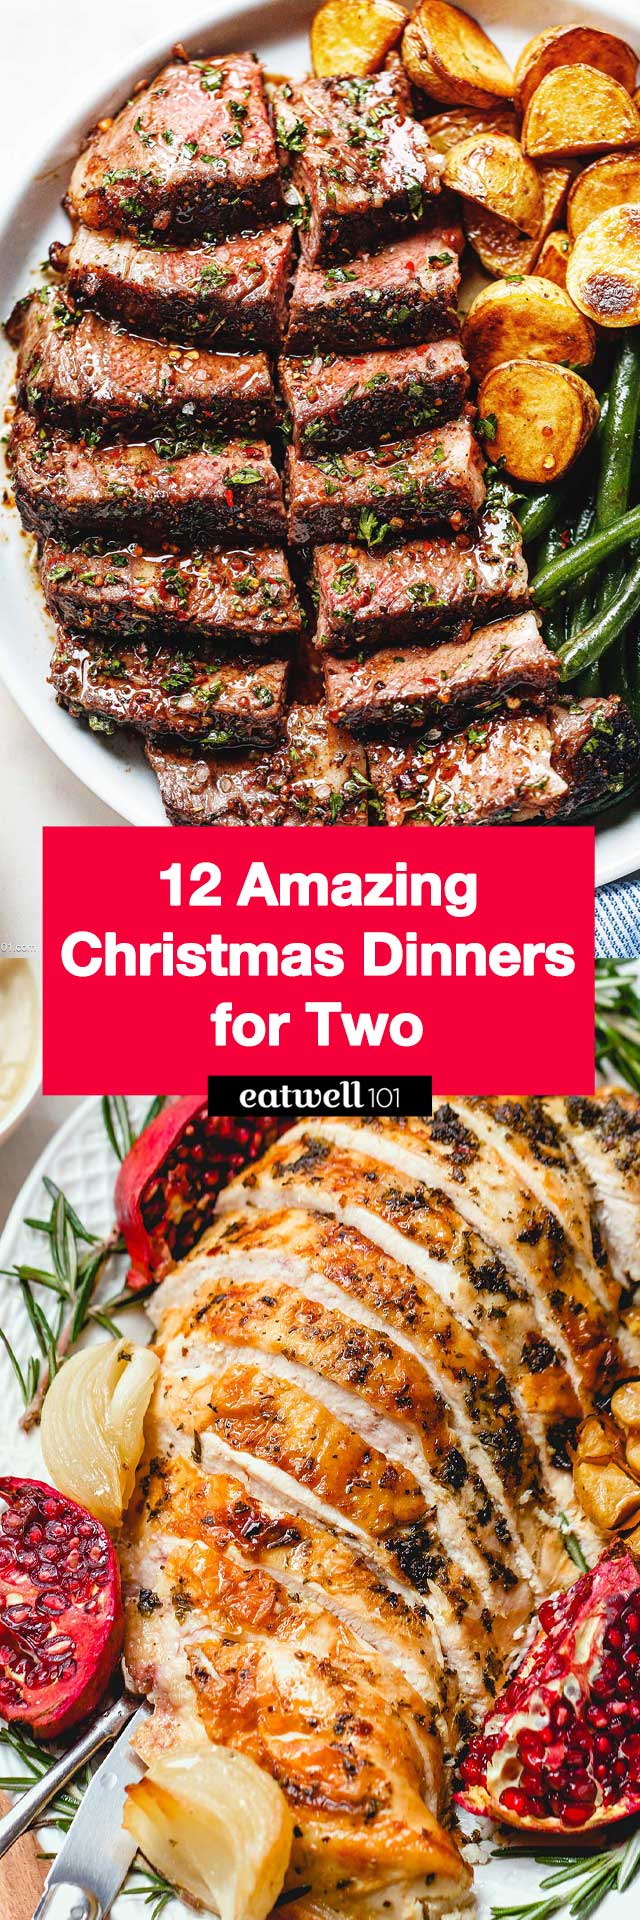 Christmas Dinner 2021! Delicious ideas for the upcoming Holiday.